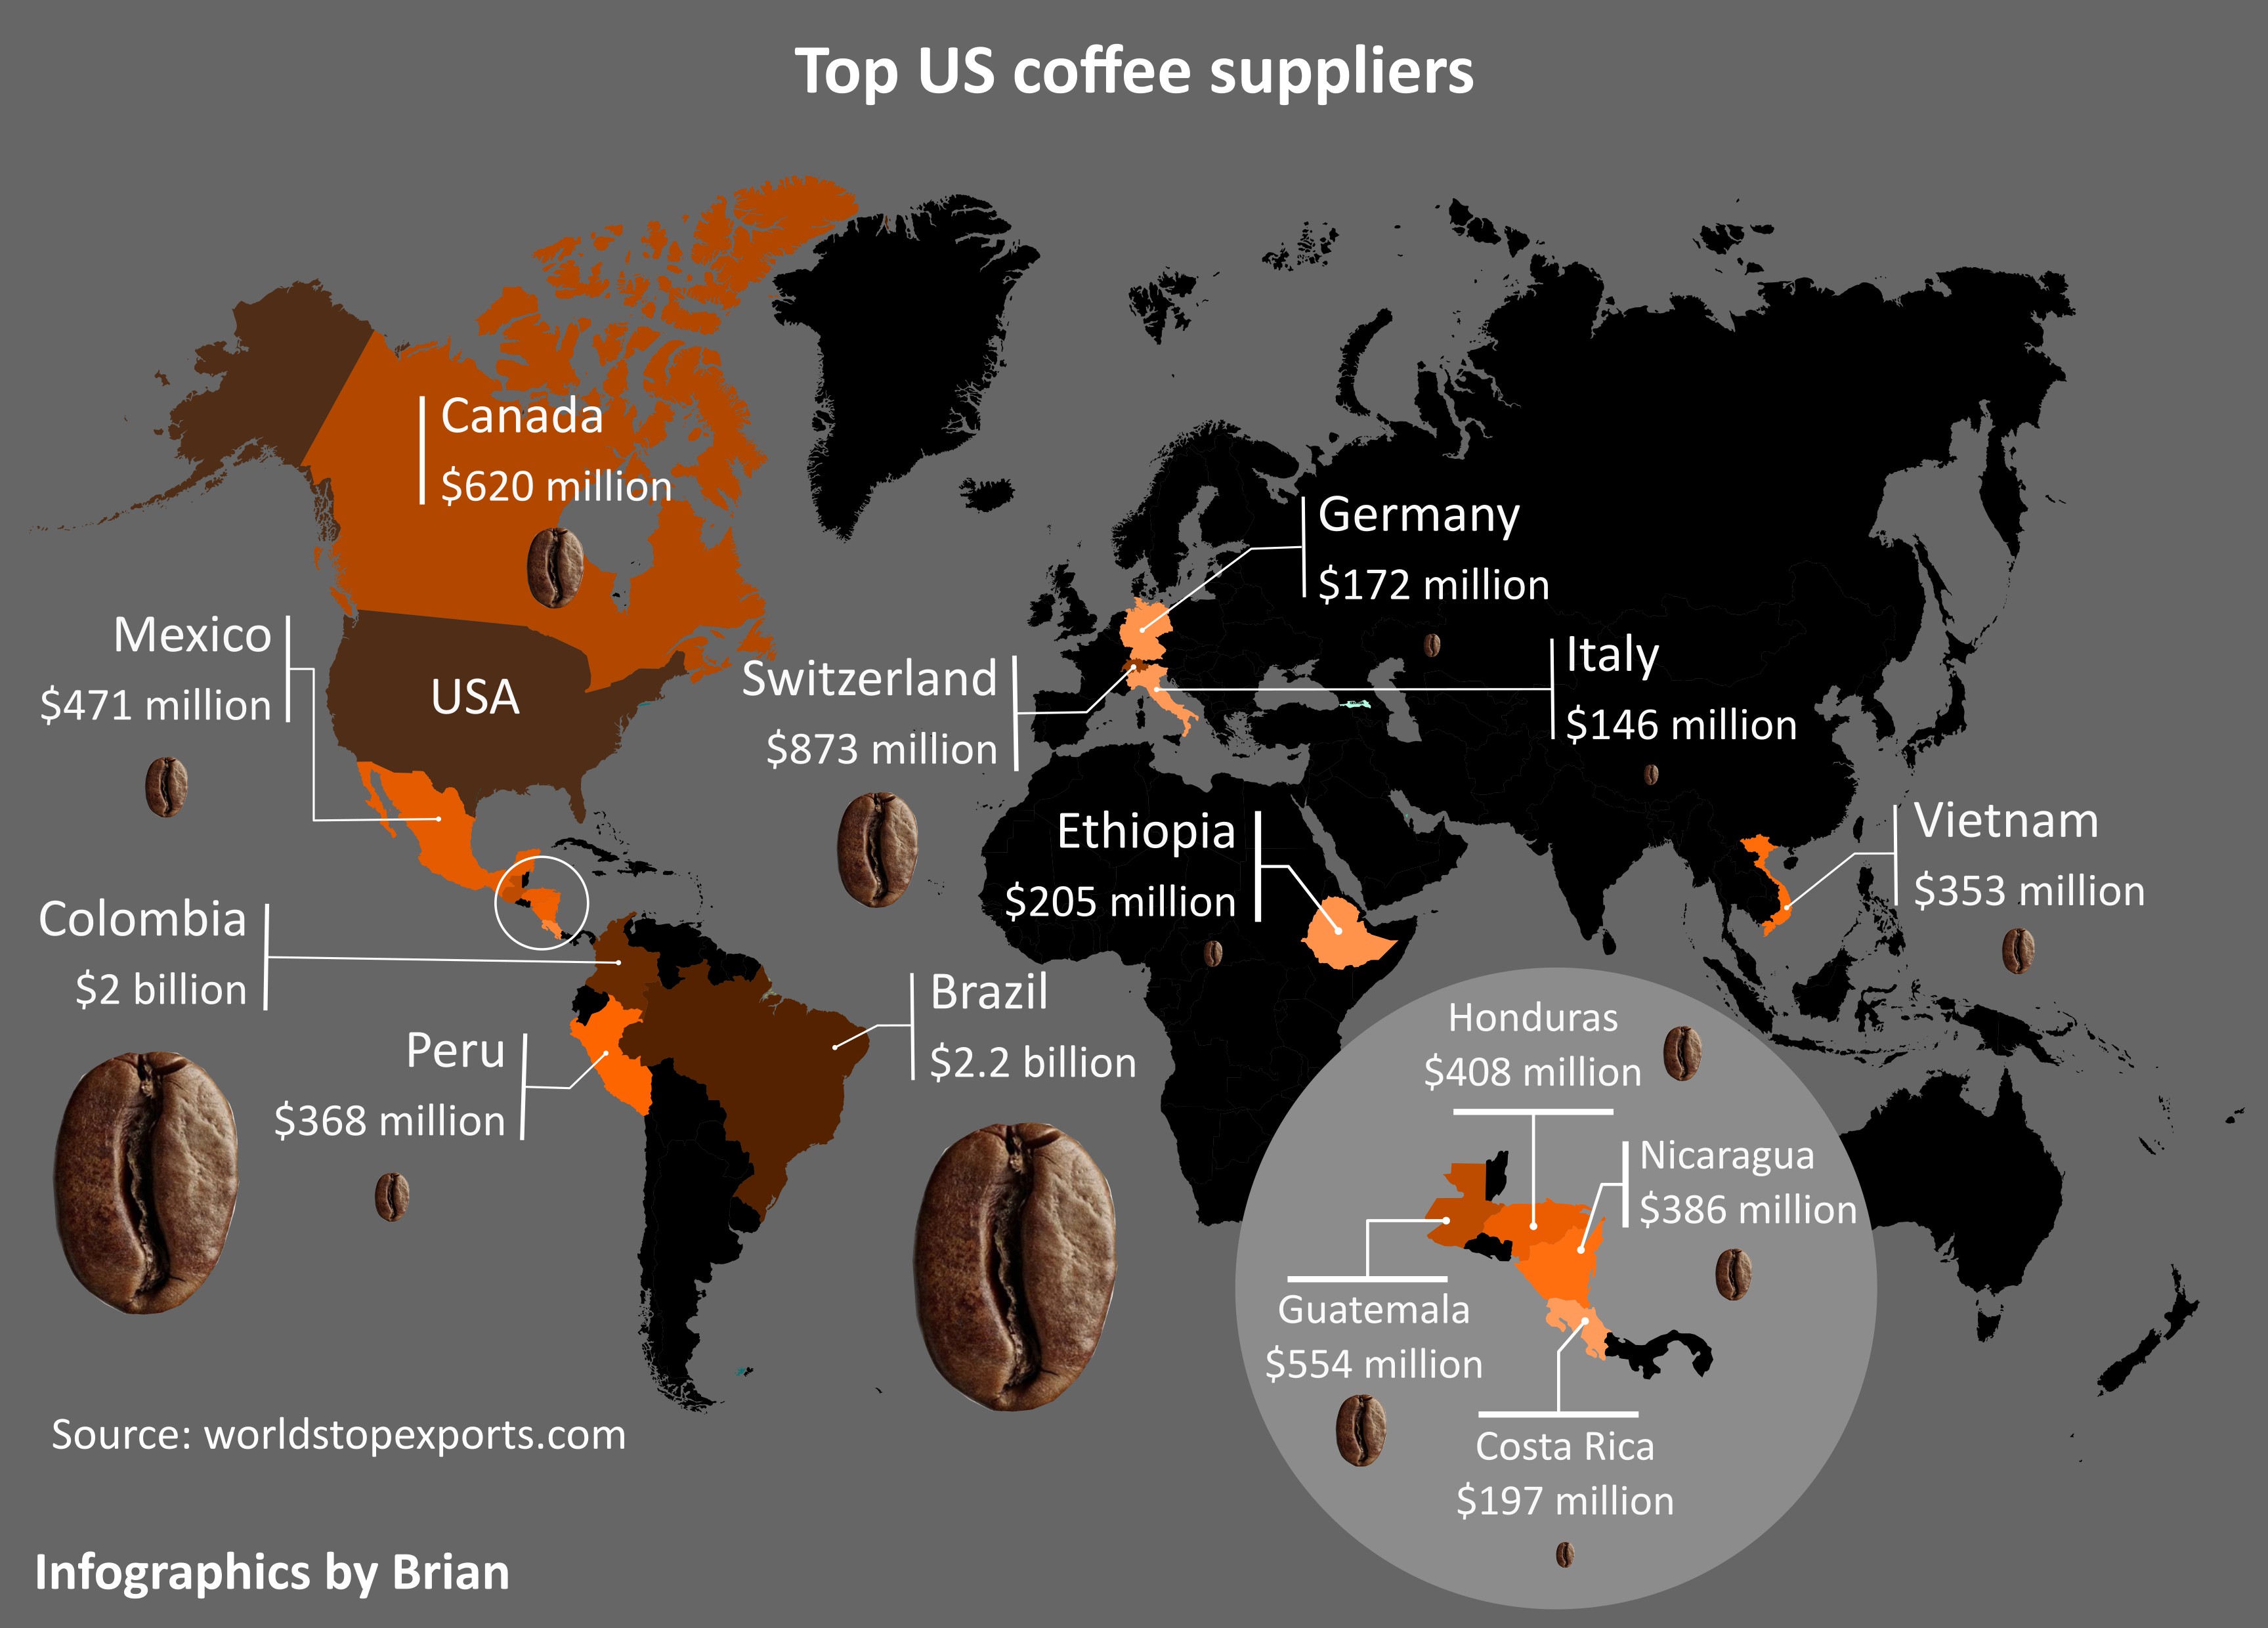 Top US coffee suppliers map